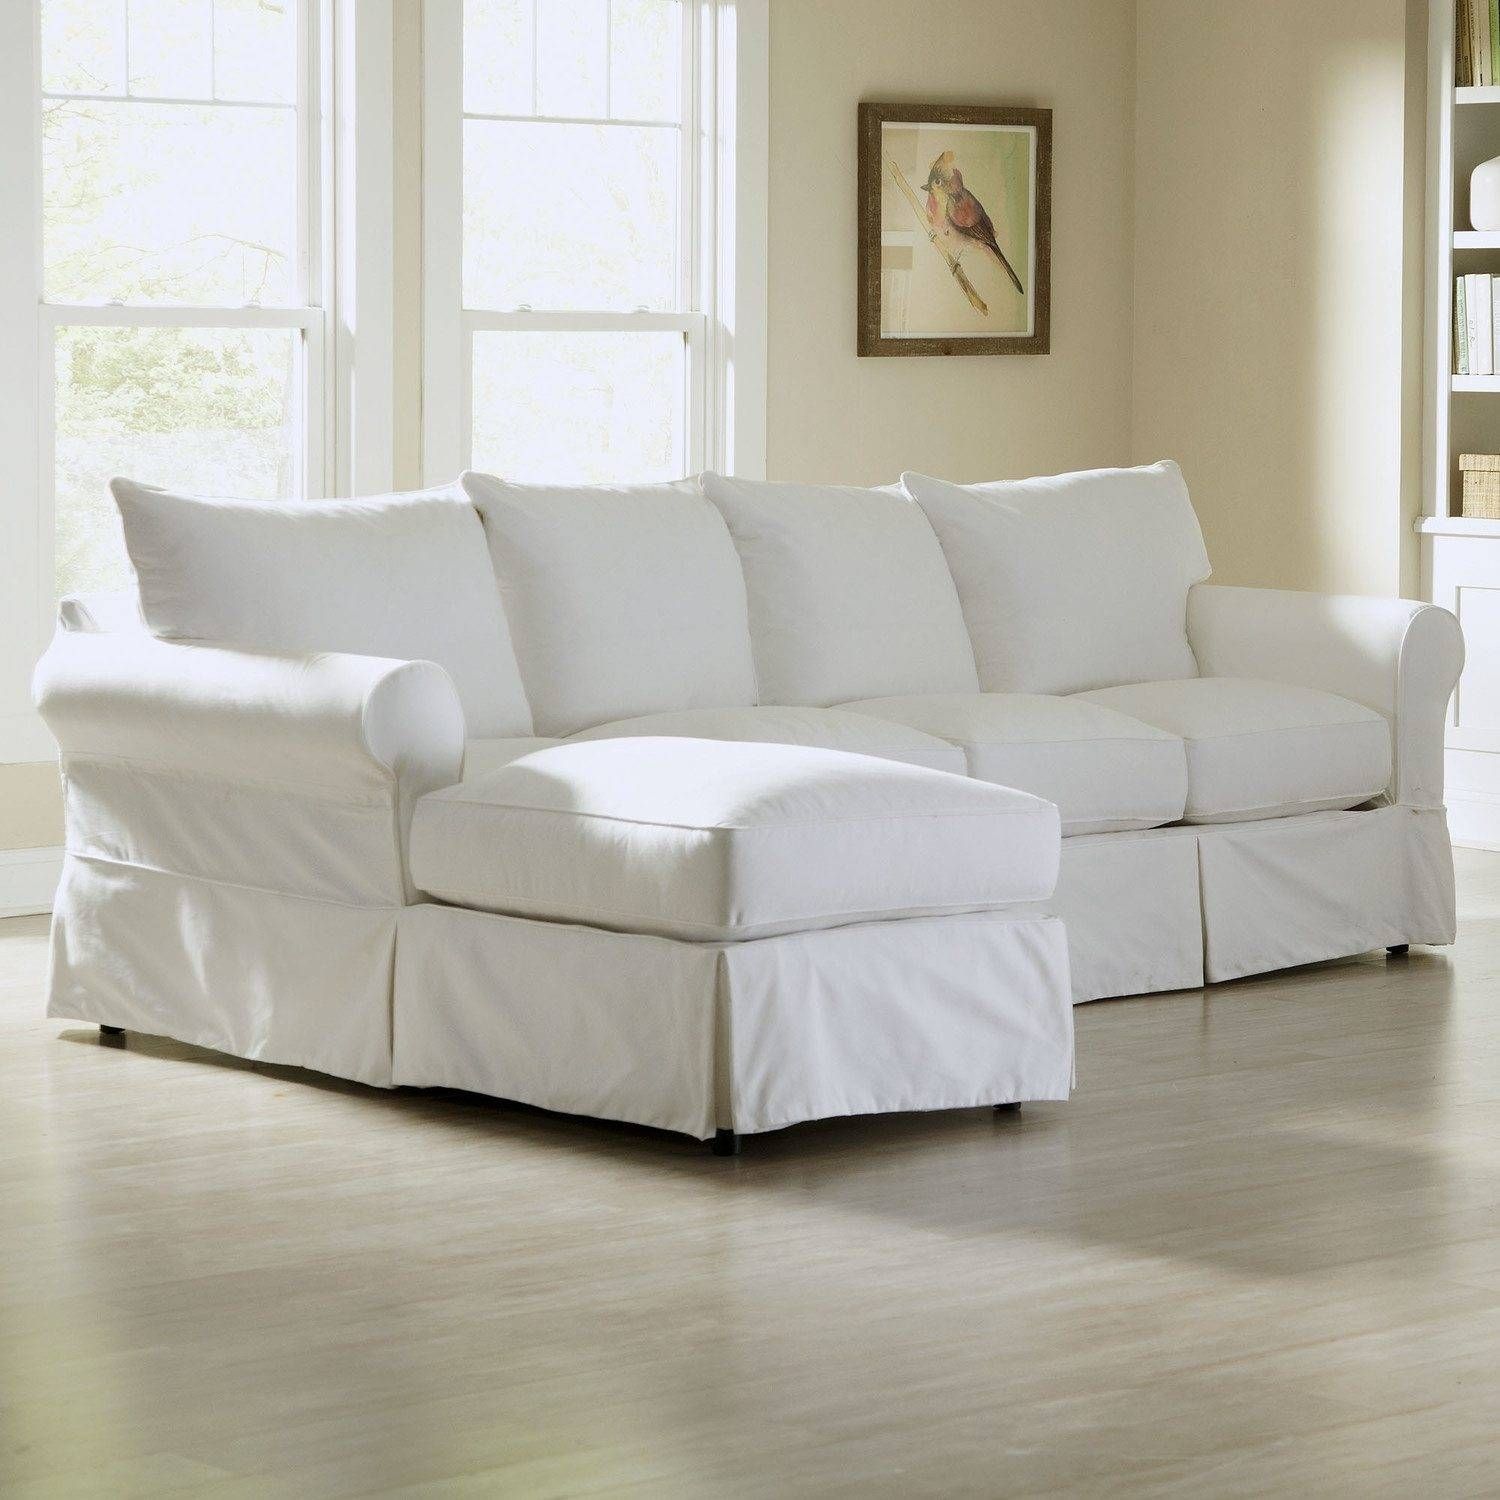 Sofas Center : 36 Excellent Down Sectional Sofa Images Concept For Goose Down Sectional Sofa (View 12 of 25)